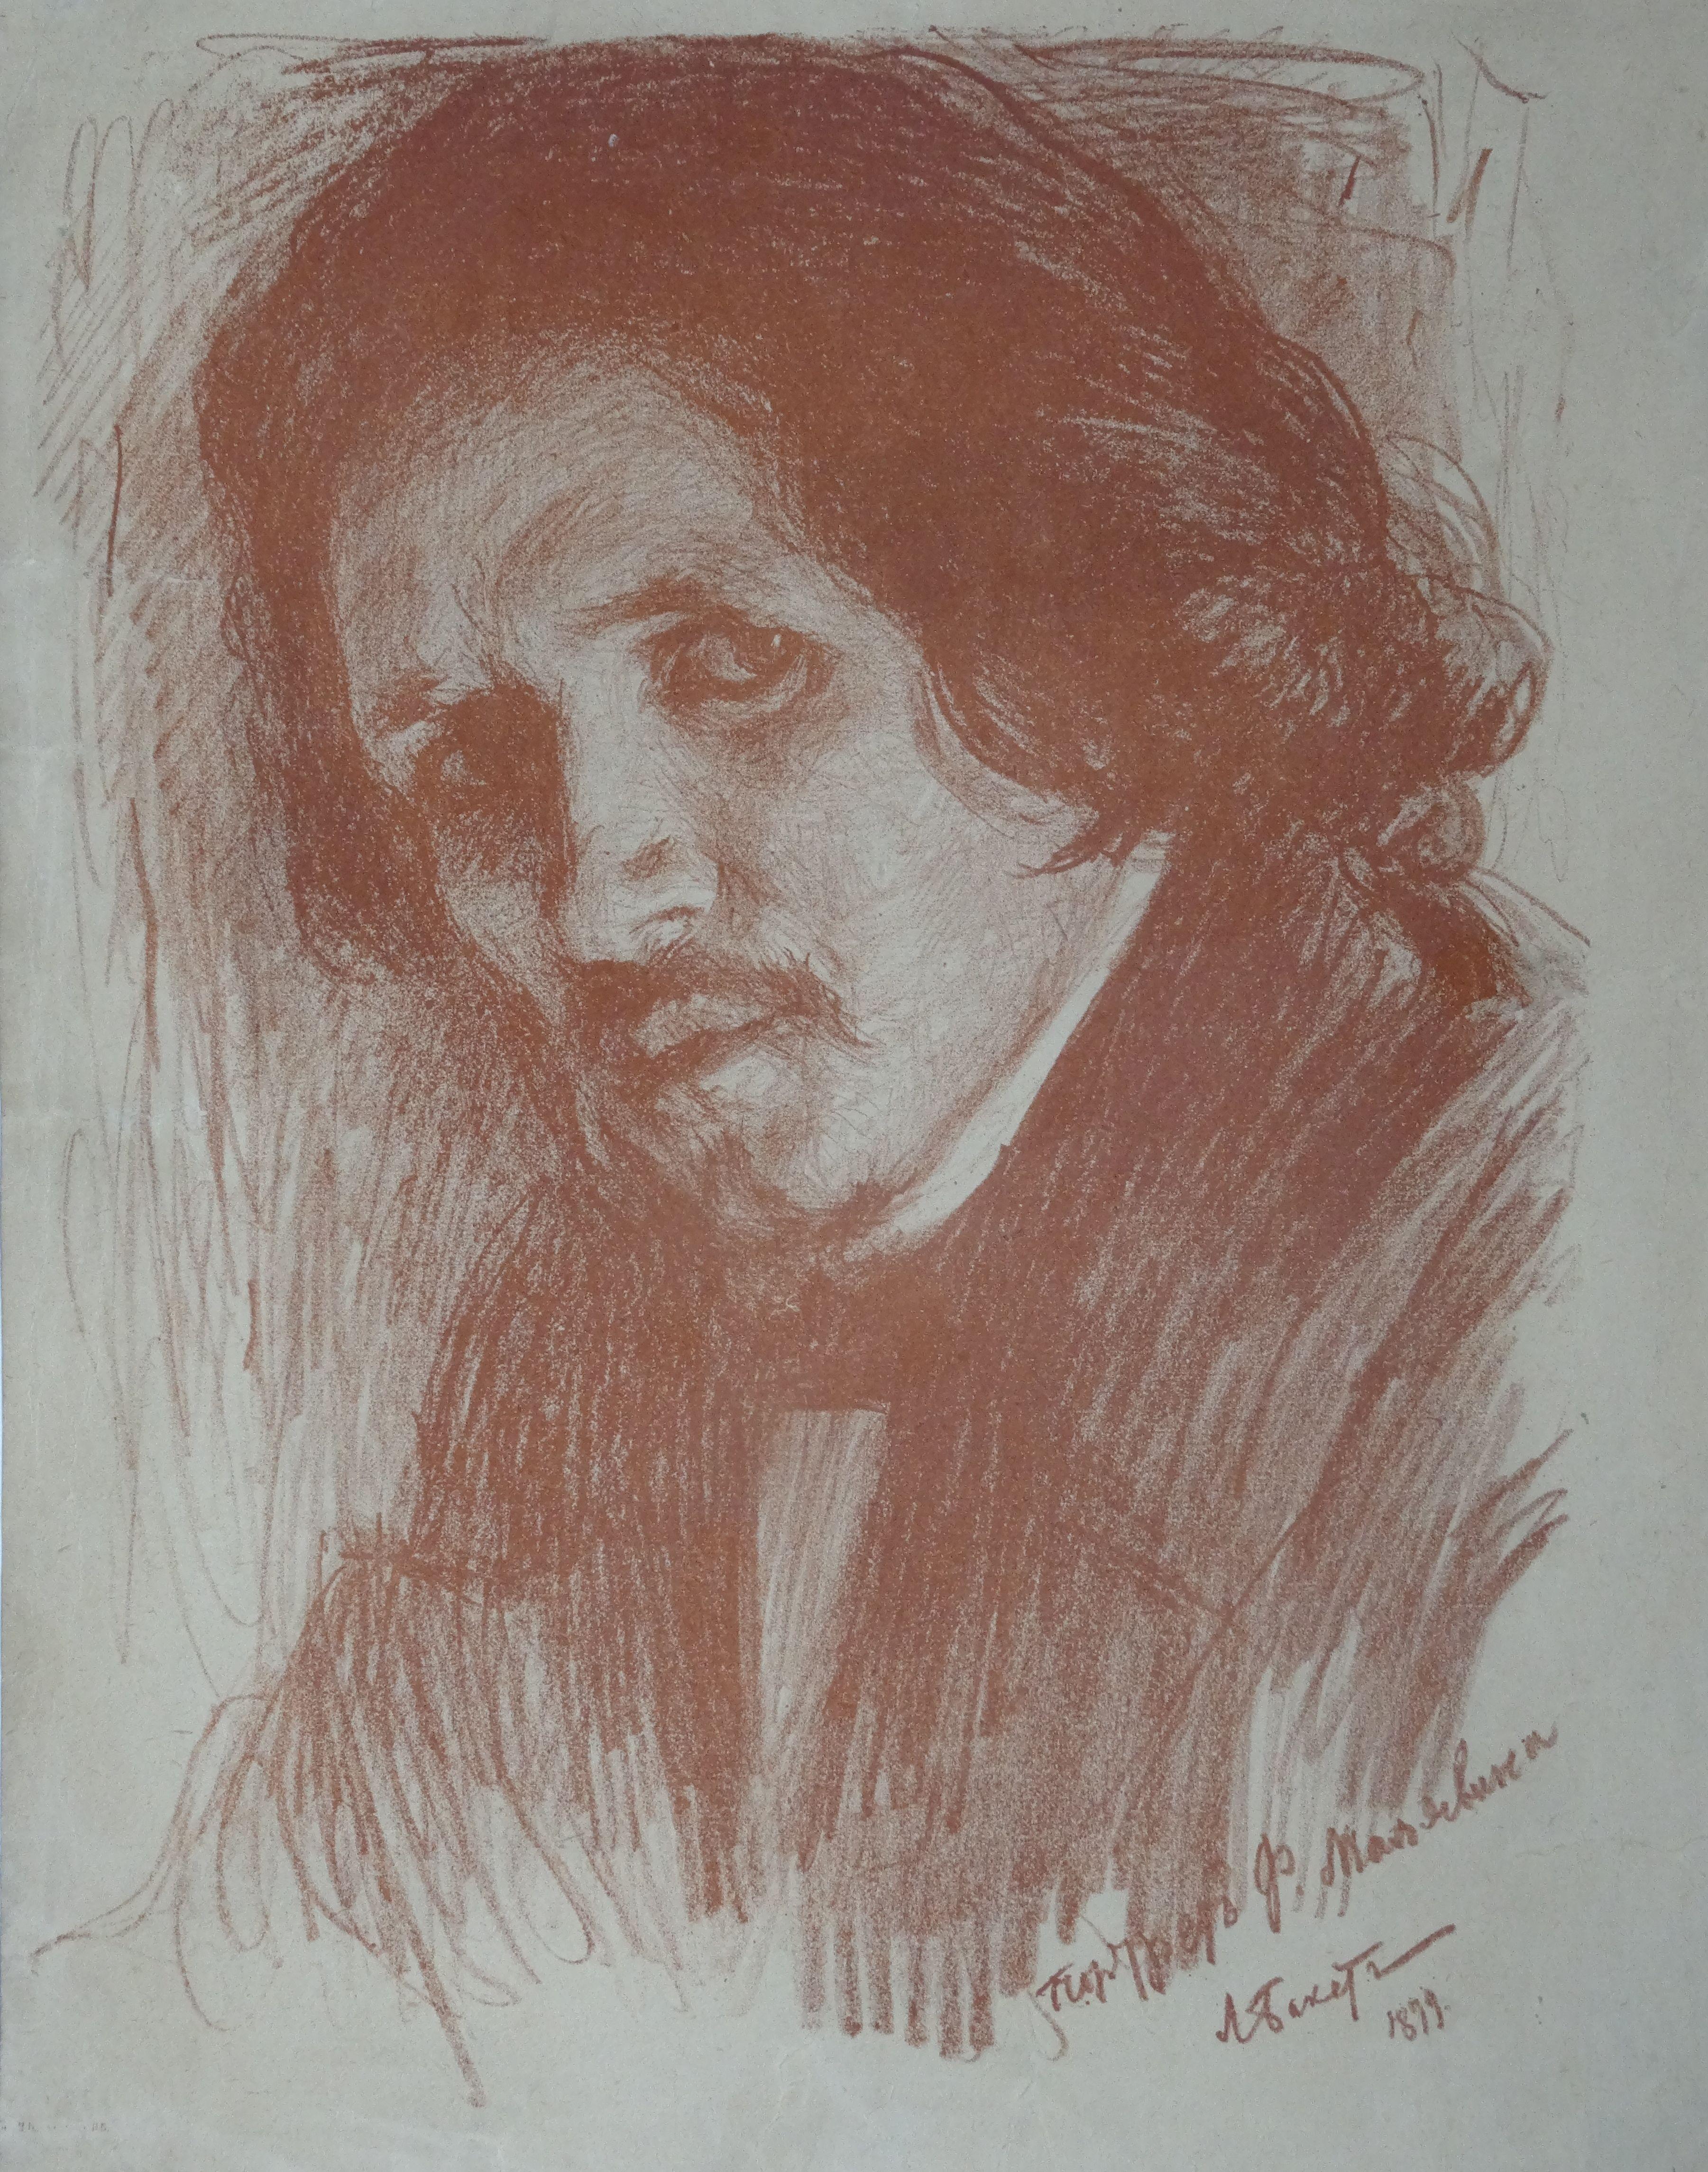 Portrait of Philip Andreevich Malavin.1879.Paper, lithography, 32x23 cm with def